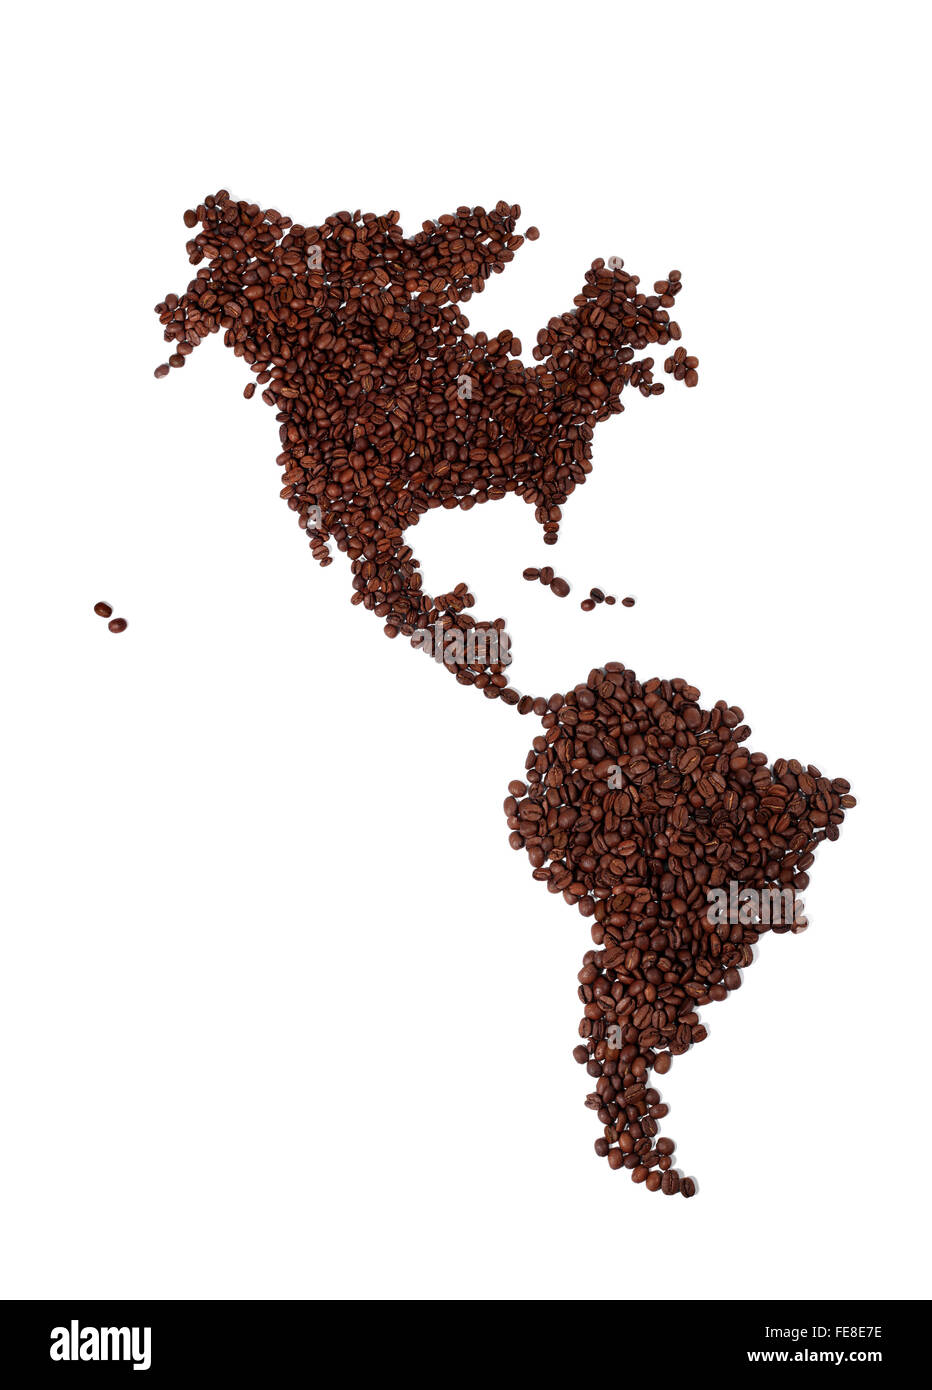 Map of North America Made of Coffee Beans Stock Photo